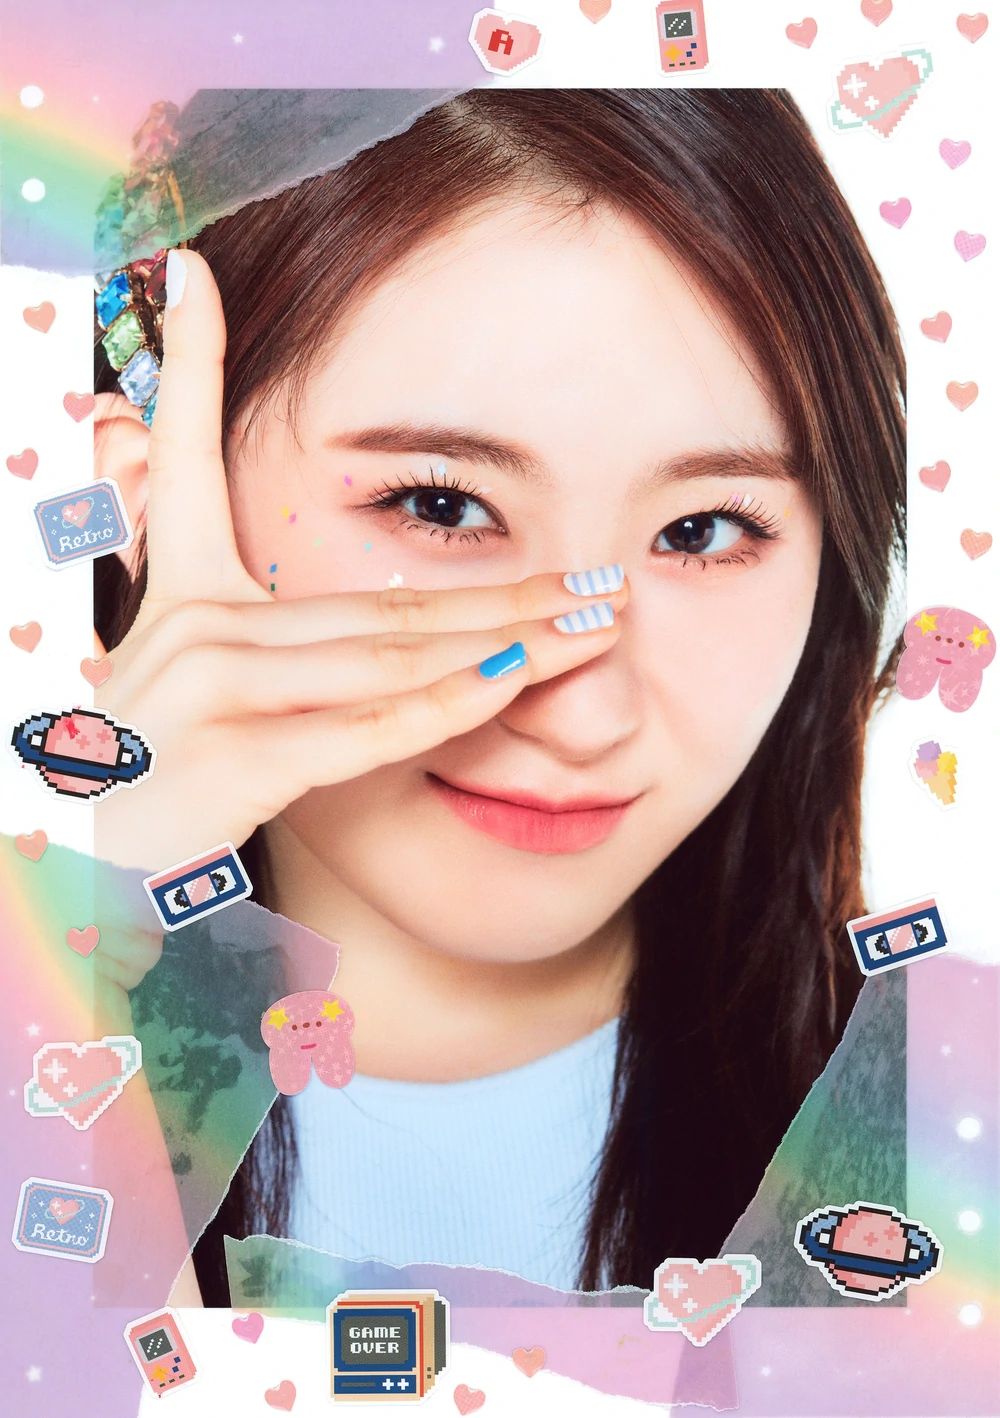 IZ*ONE Oneiric Diary Chaeyeon Concept Teaser Picture Image Photo Kpop K-Concept 5